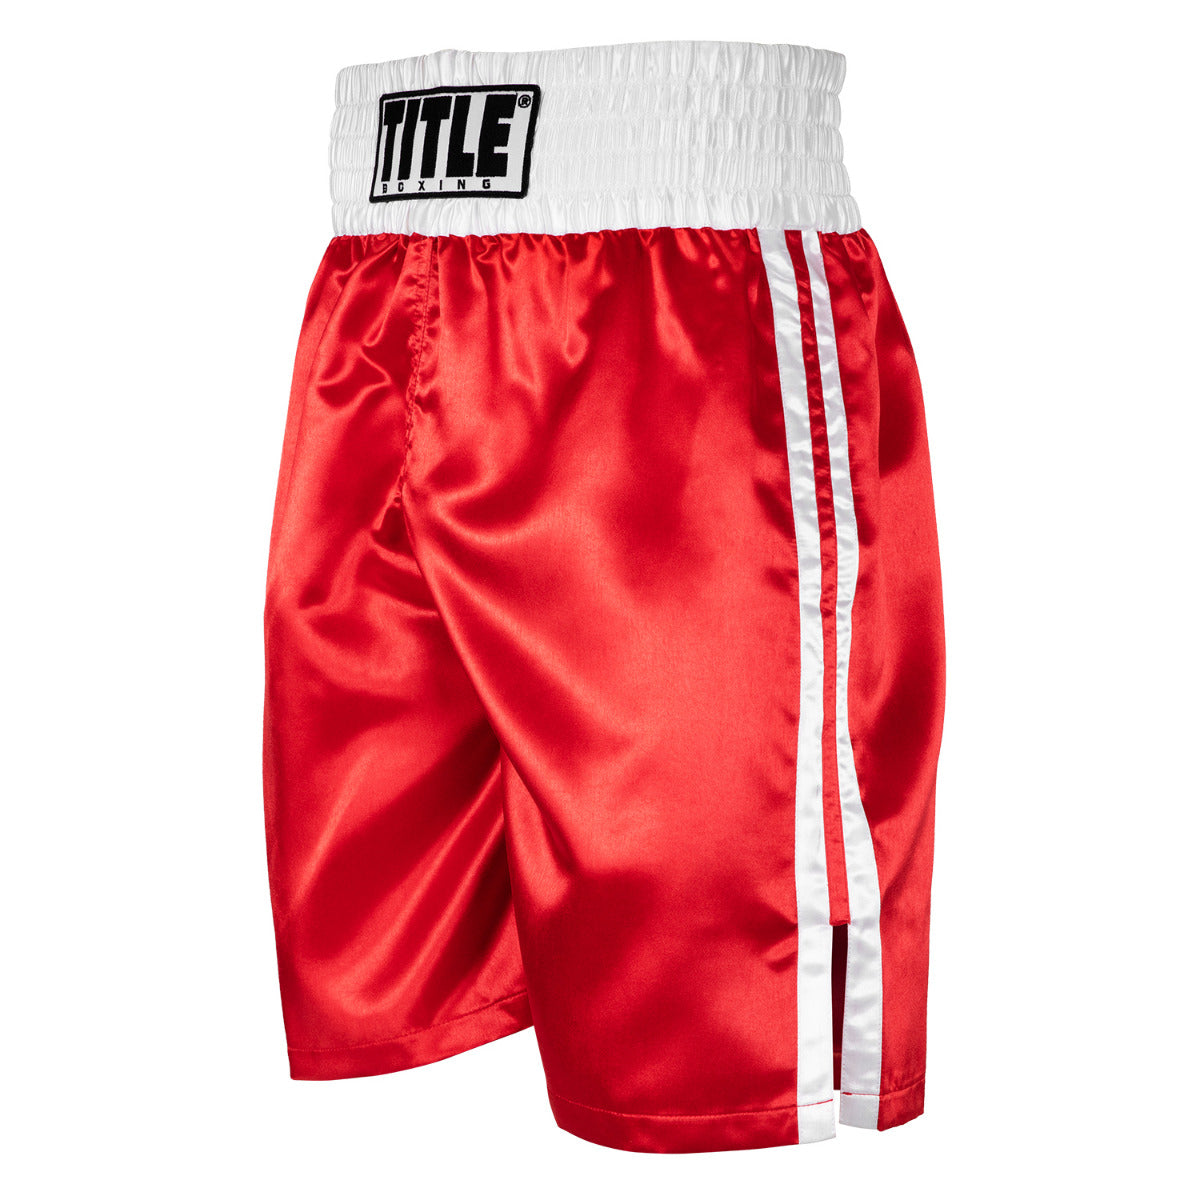 TITLE Professional Boxing Trunks